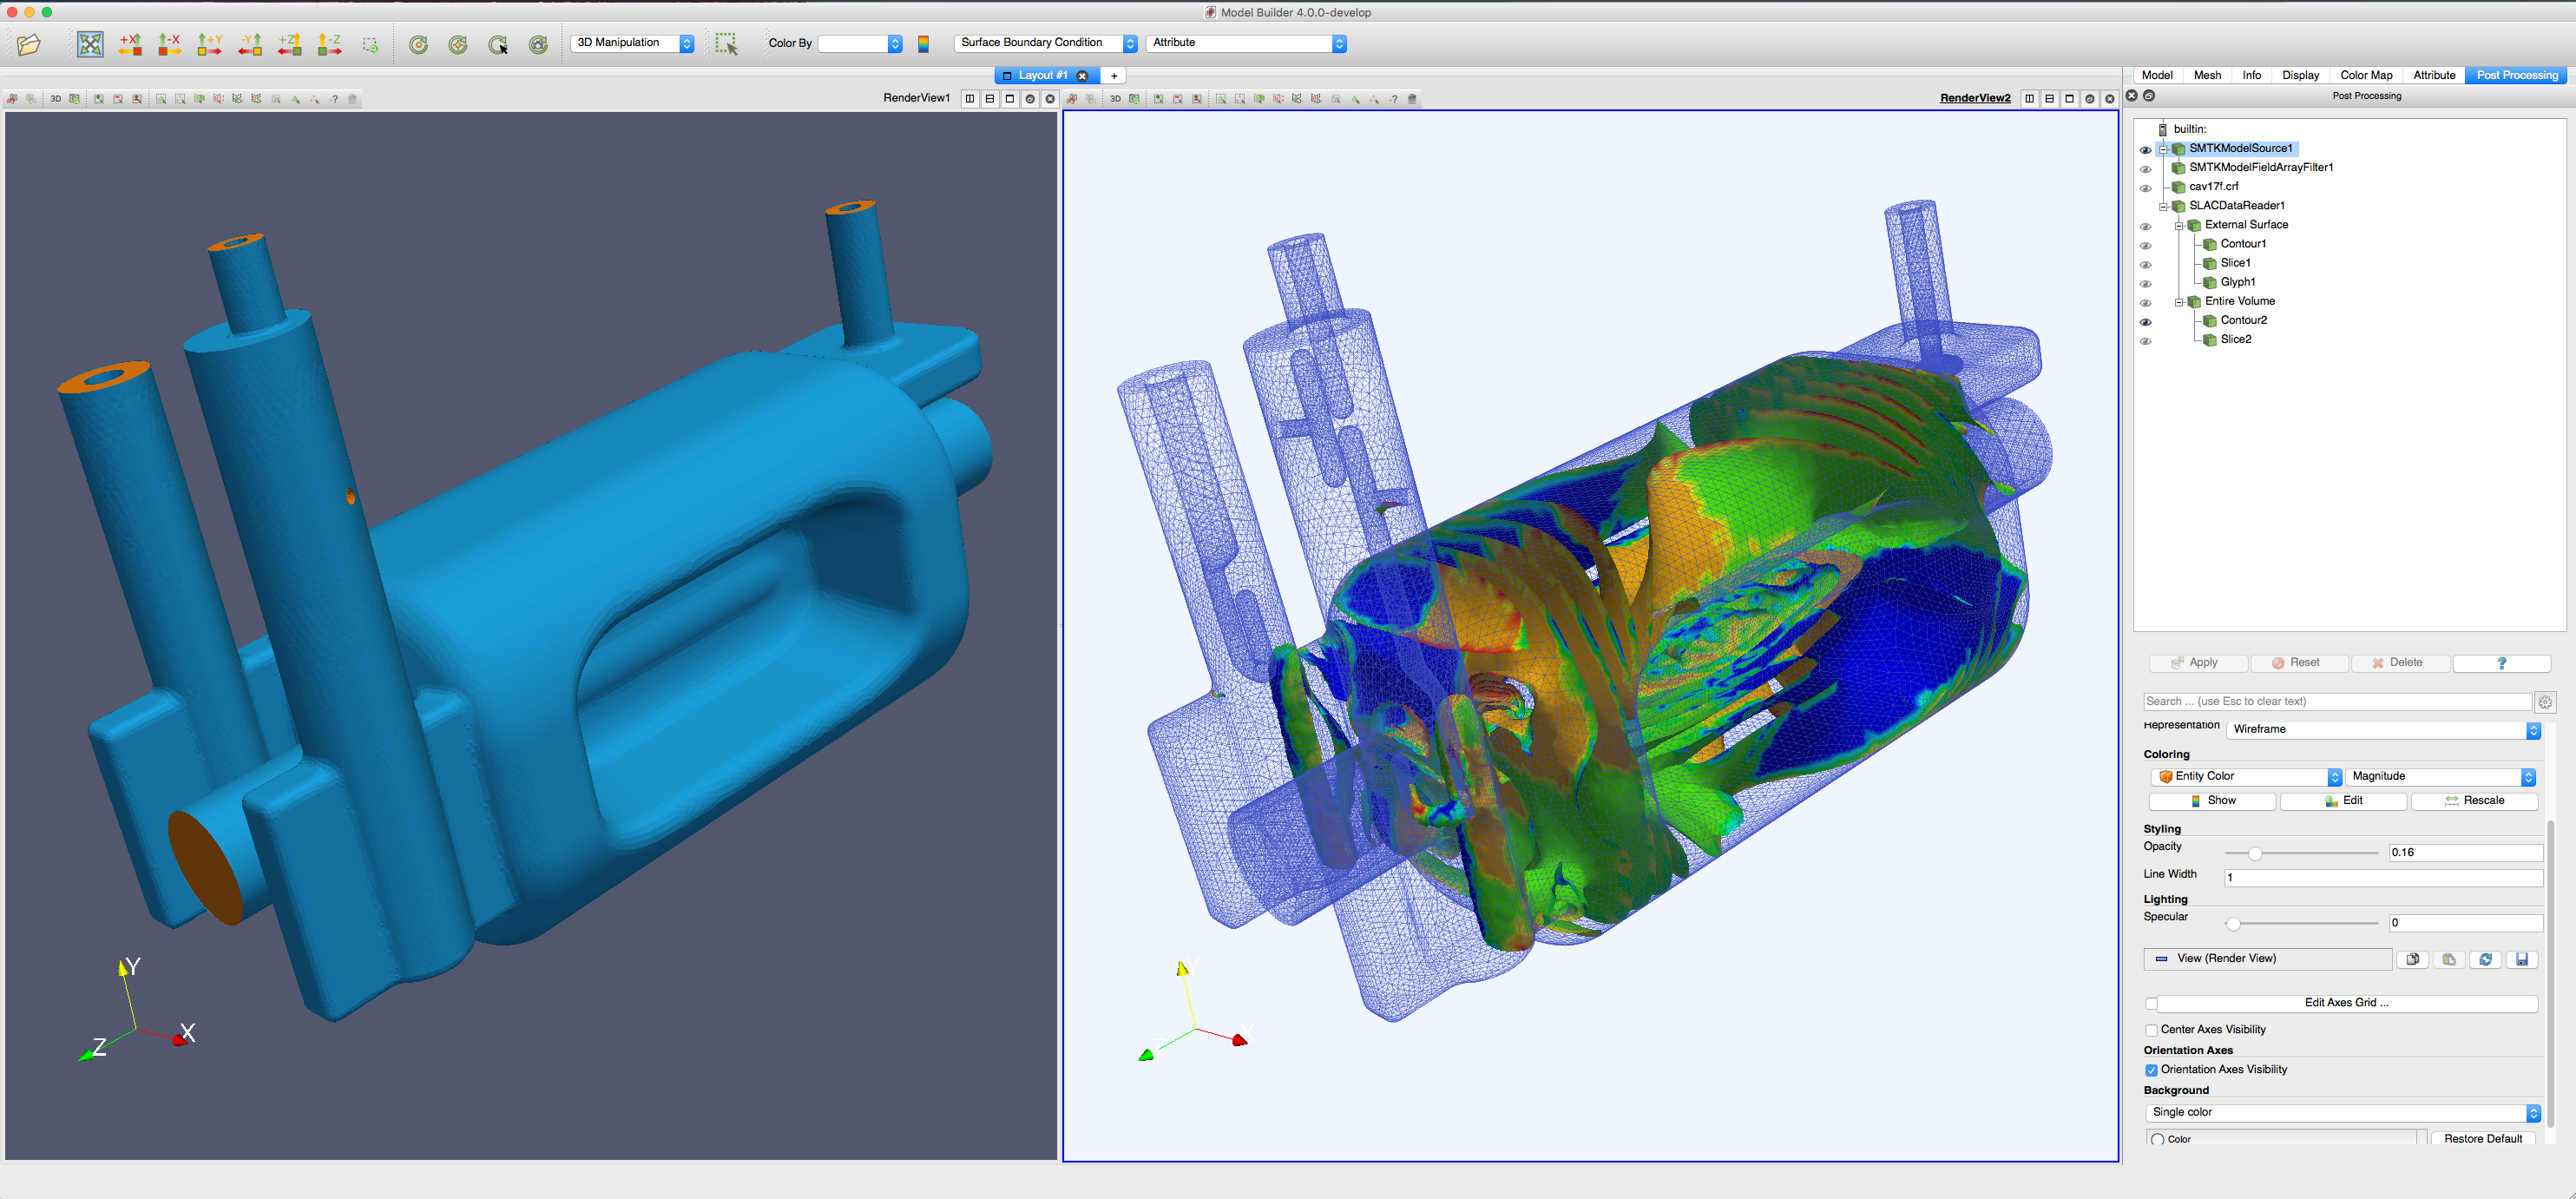 ModelBuilder defines a simulation workflow of a crab cavity for the Large Hadron Collider.